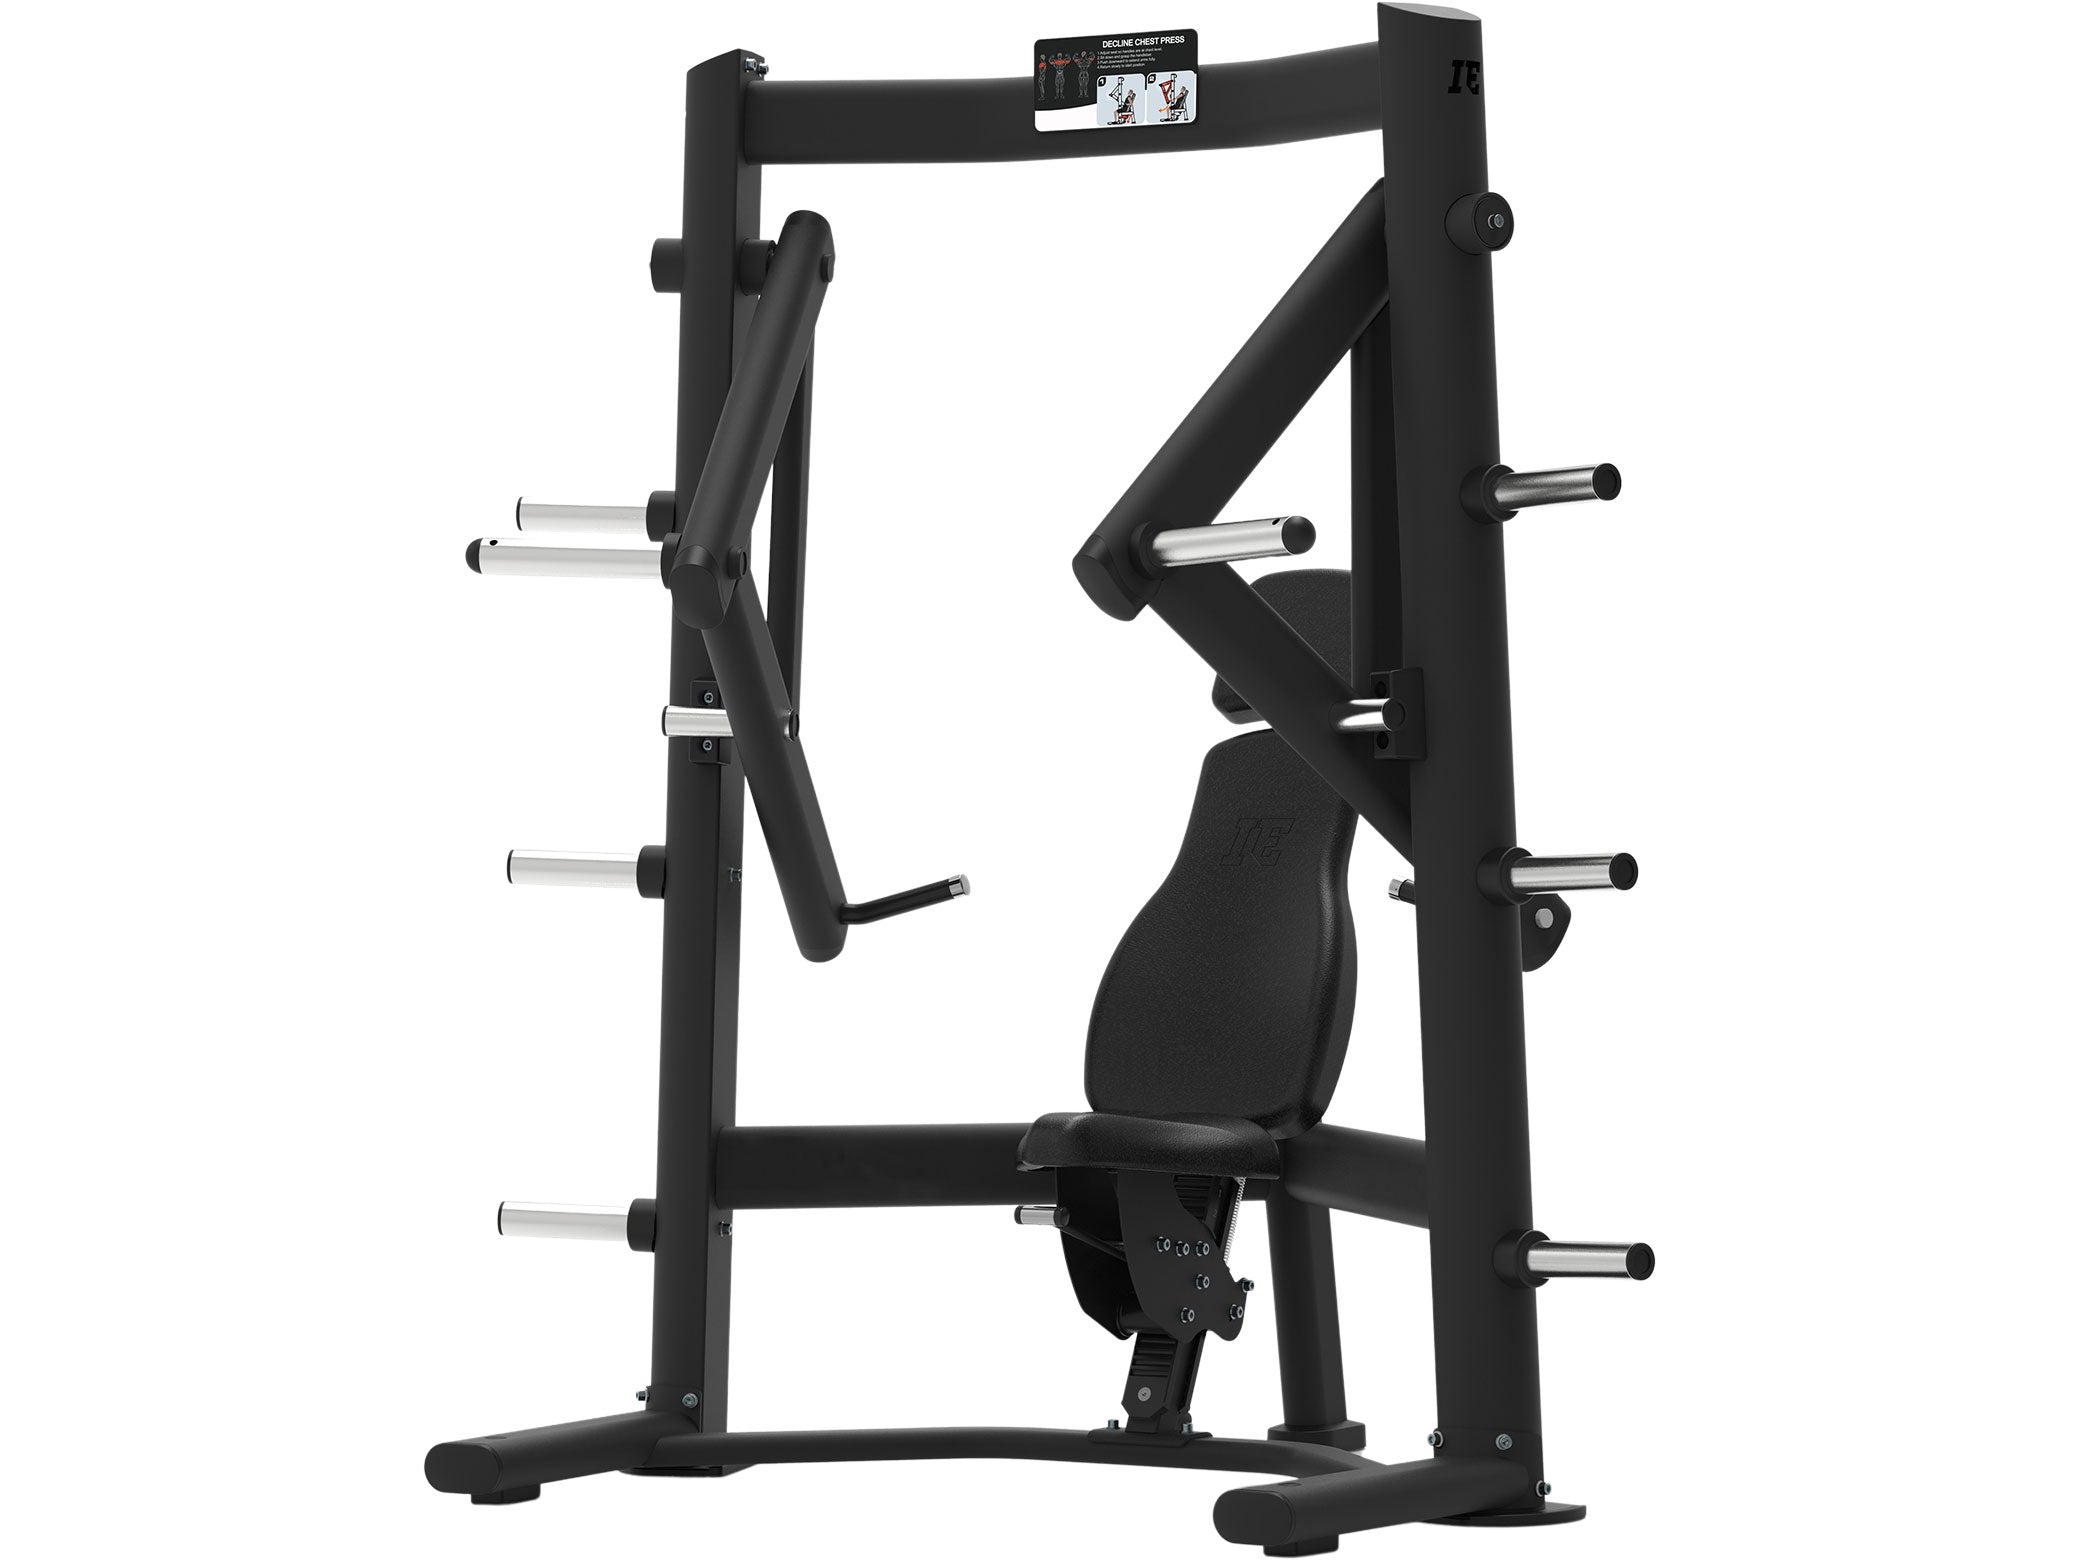 Factory photo of a New Sportgear Plate Loaded Decline Chest Press